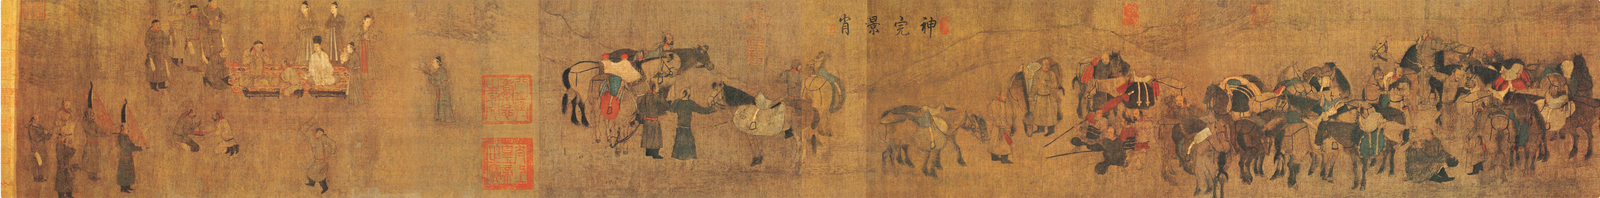 Zhuoxie tu, a 10th-century painting of a rest stop for a Khitan khan